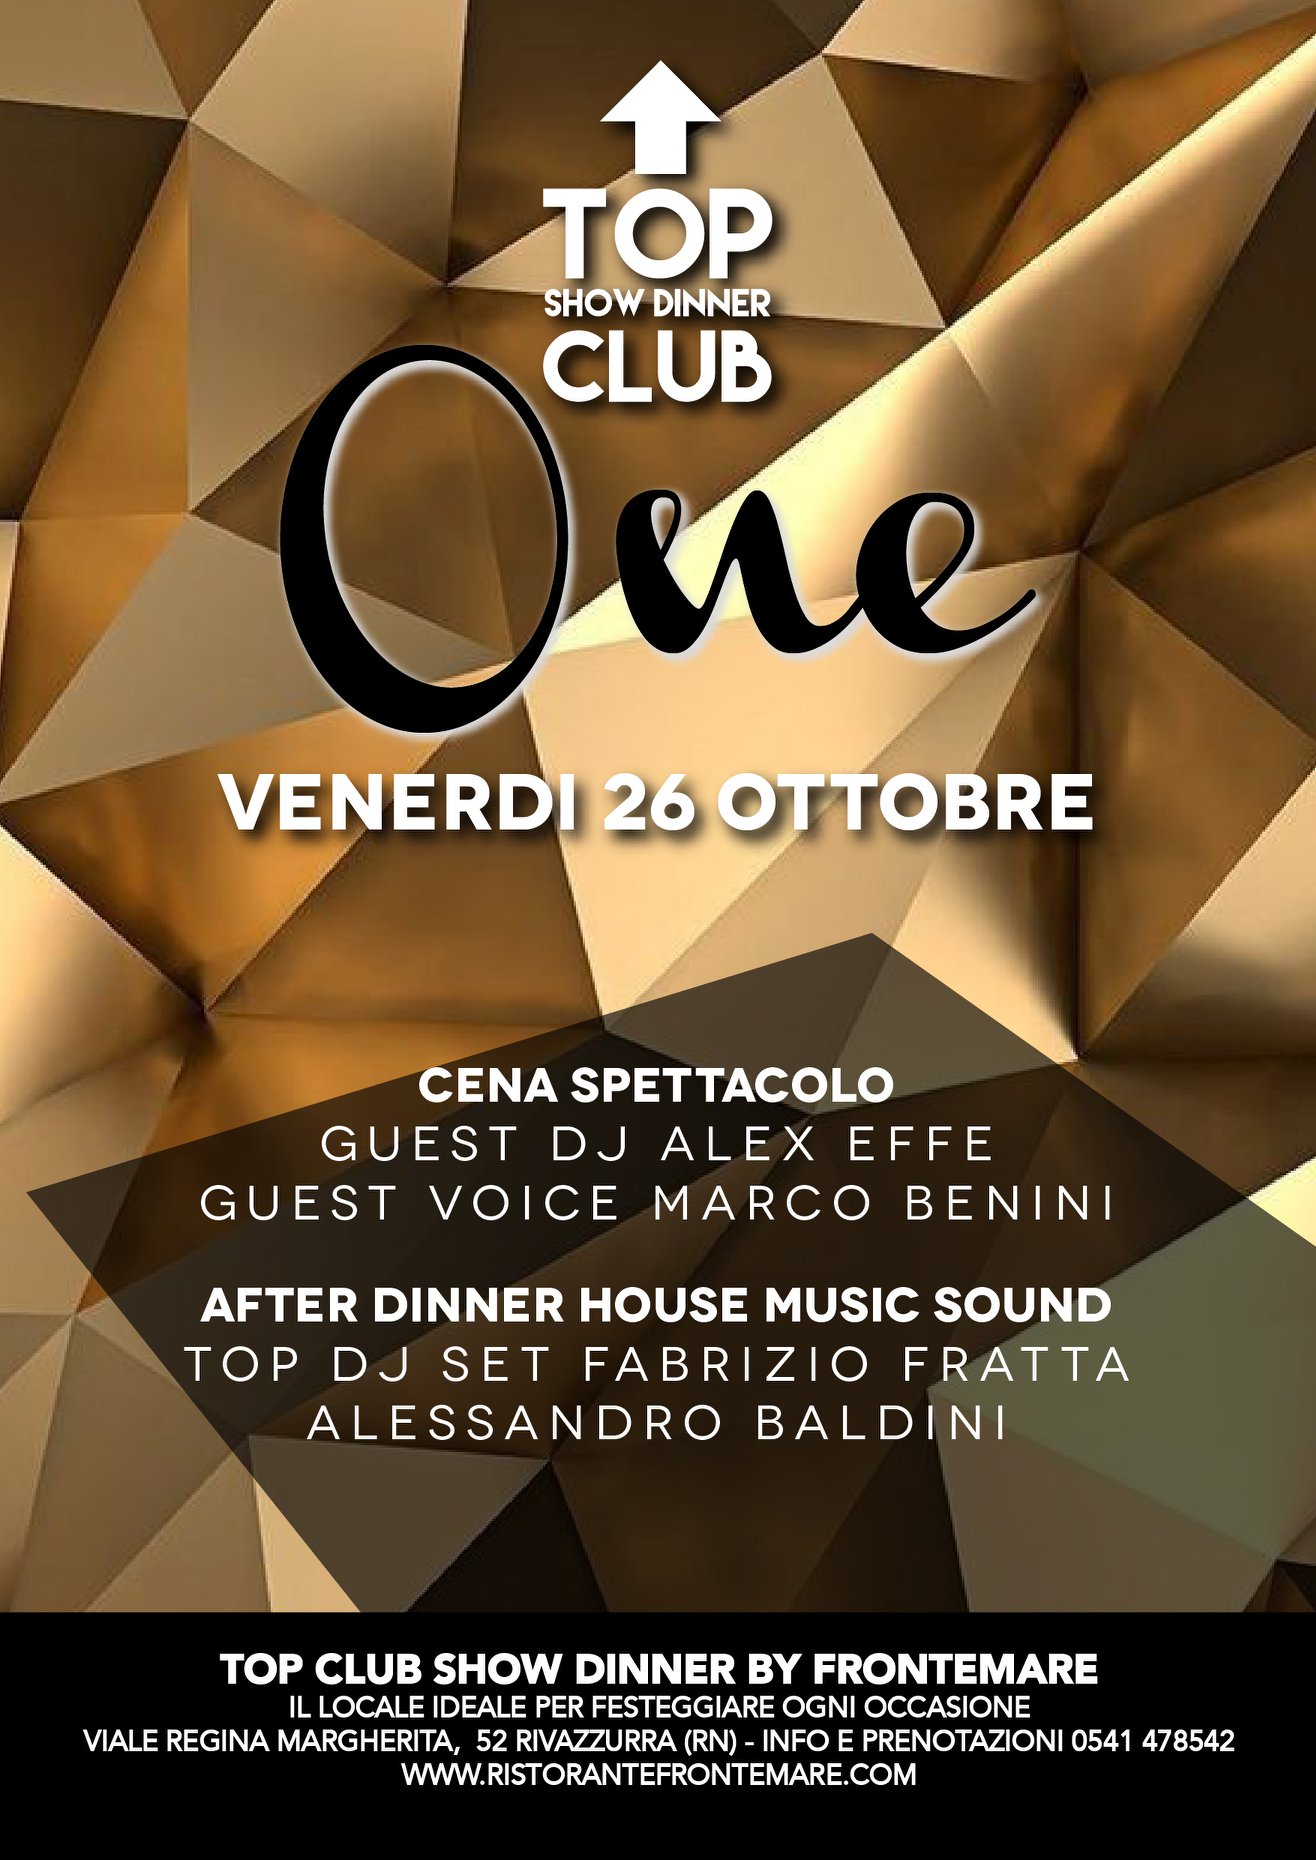 One Top Club By Frontemare Rimini